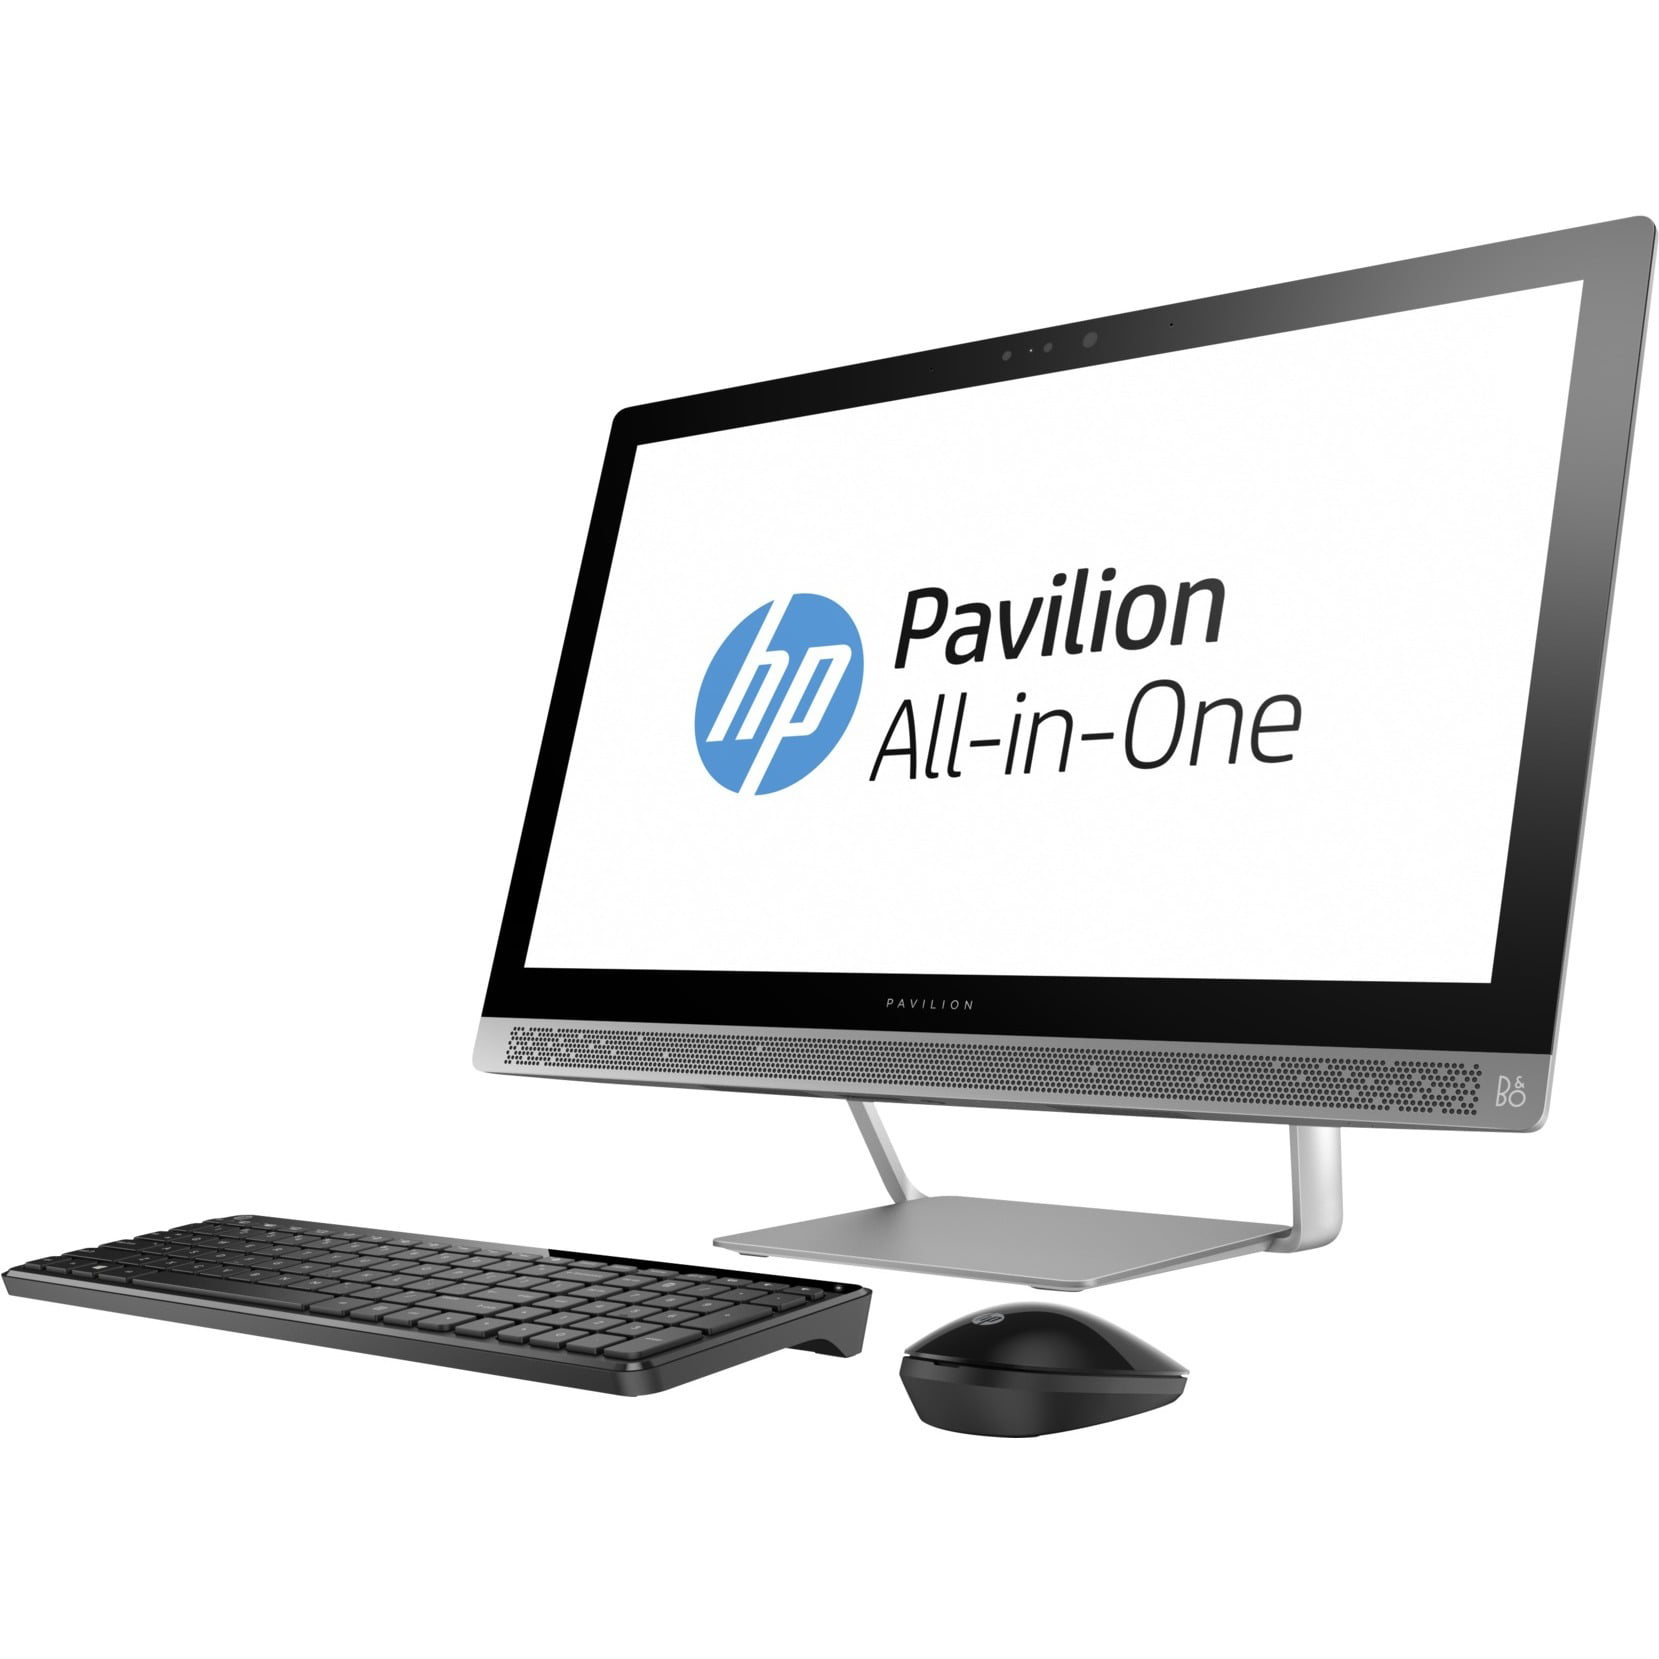 HP Pavilion 23.8" Full HD Touchscreen All-In-One Computer, Intel Core